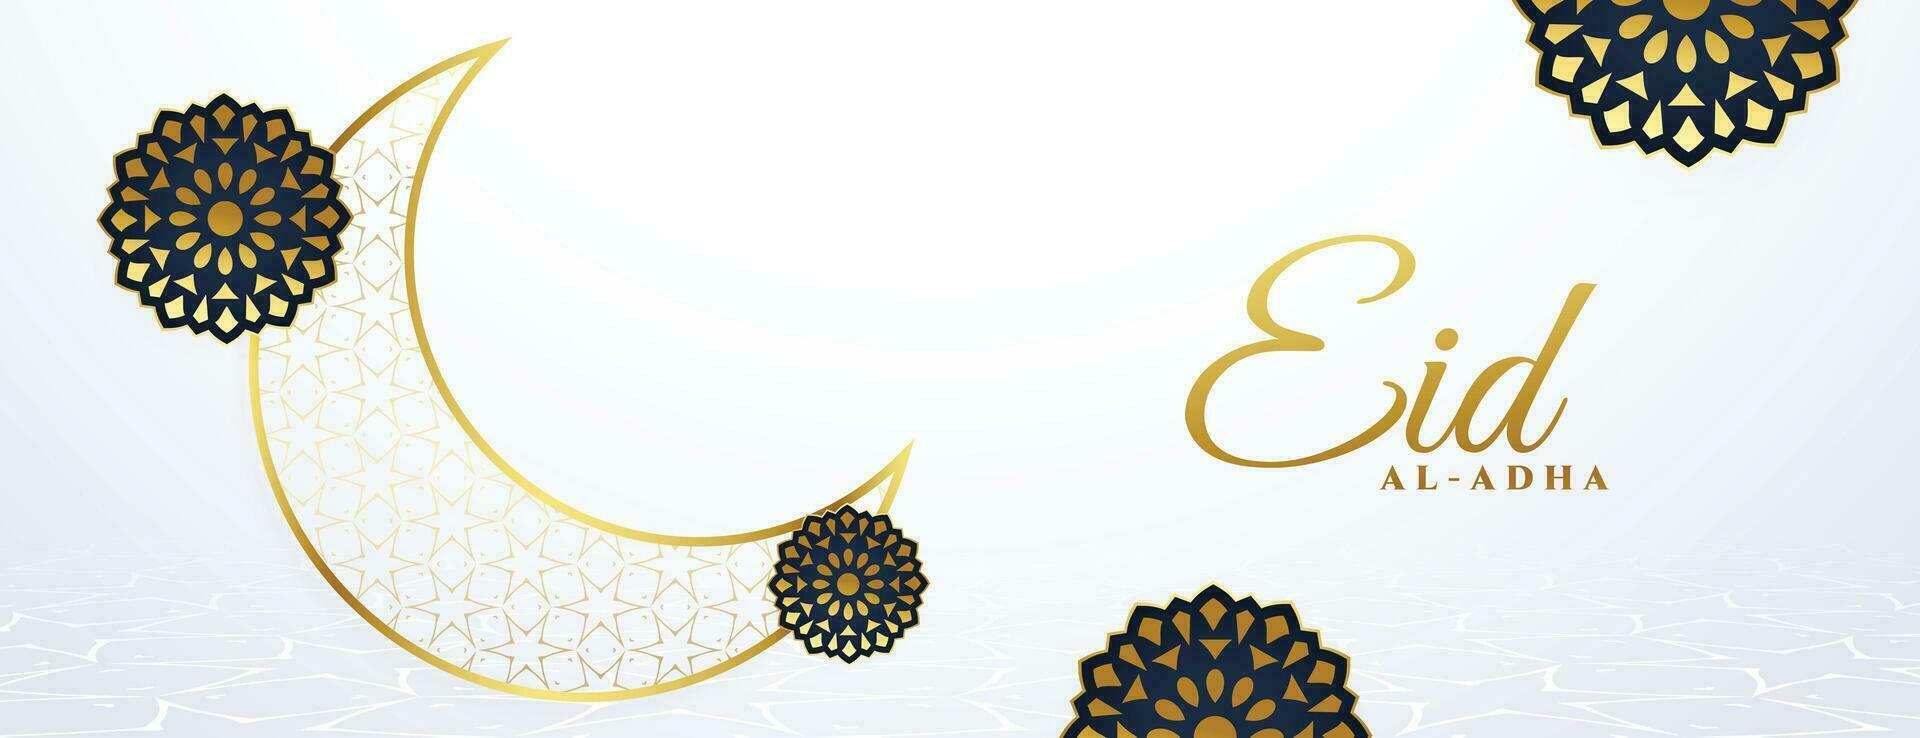 eid al adha bakrid banner in white and golden color vector